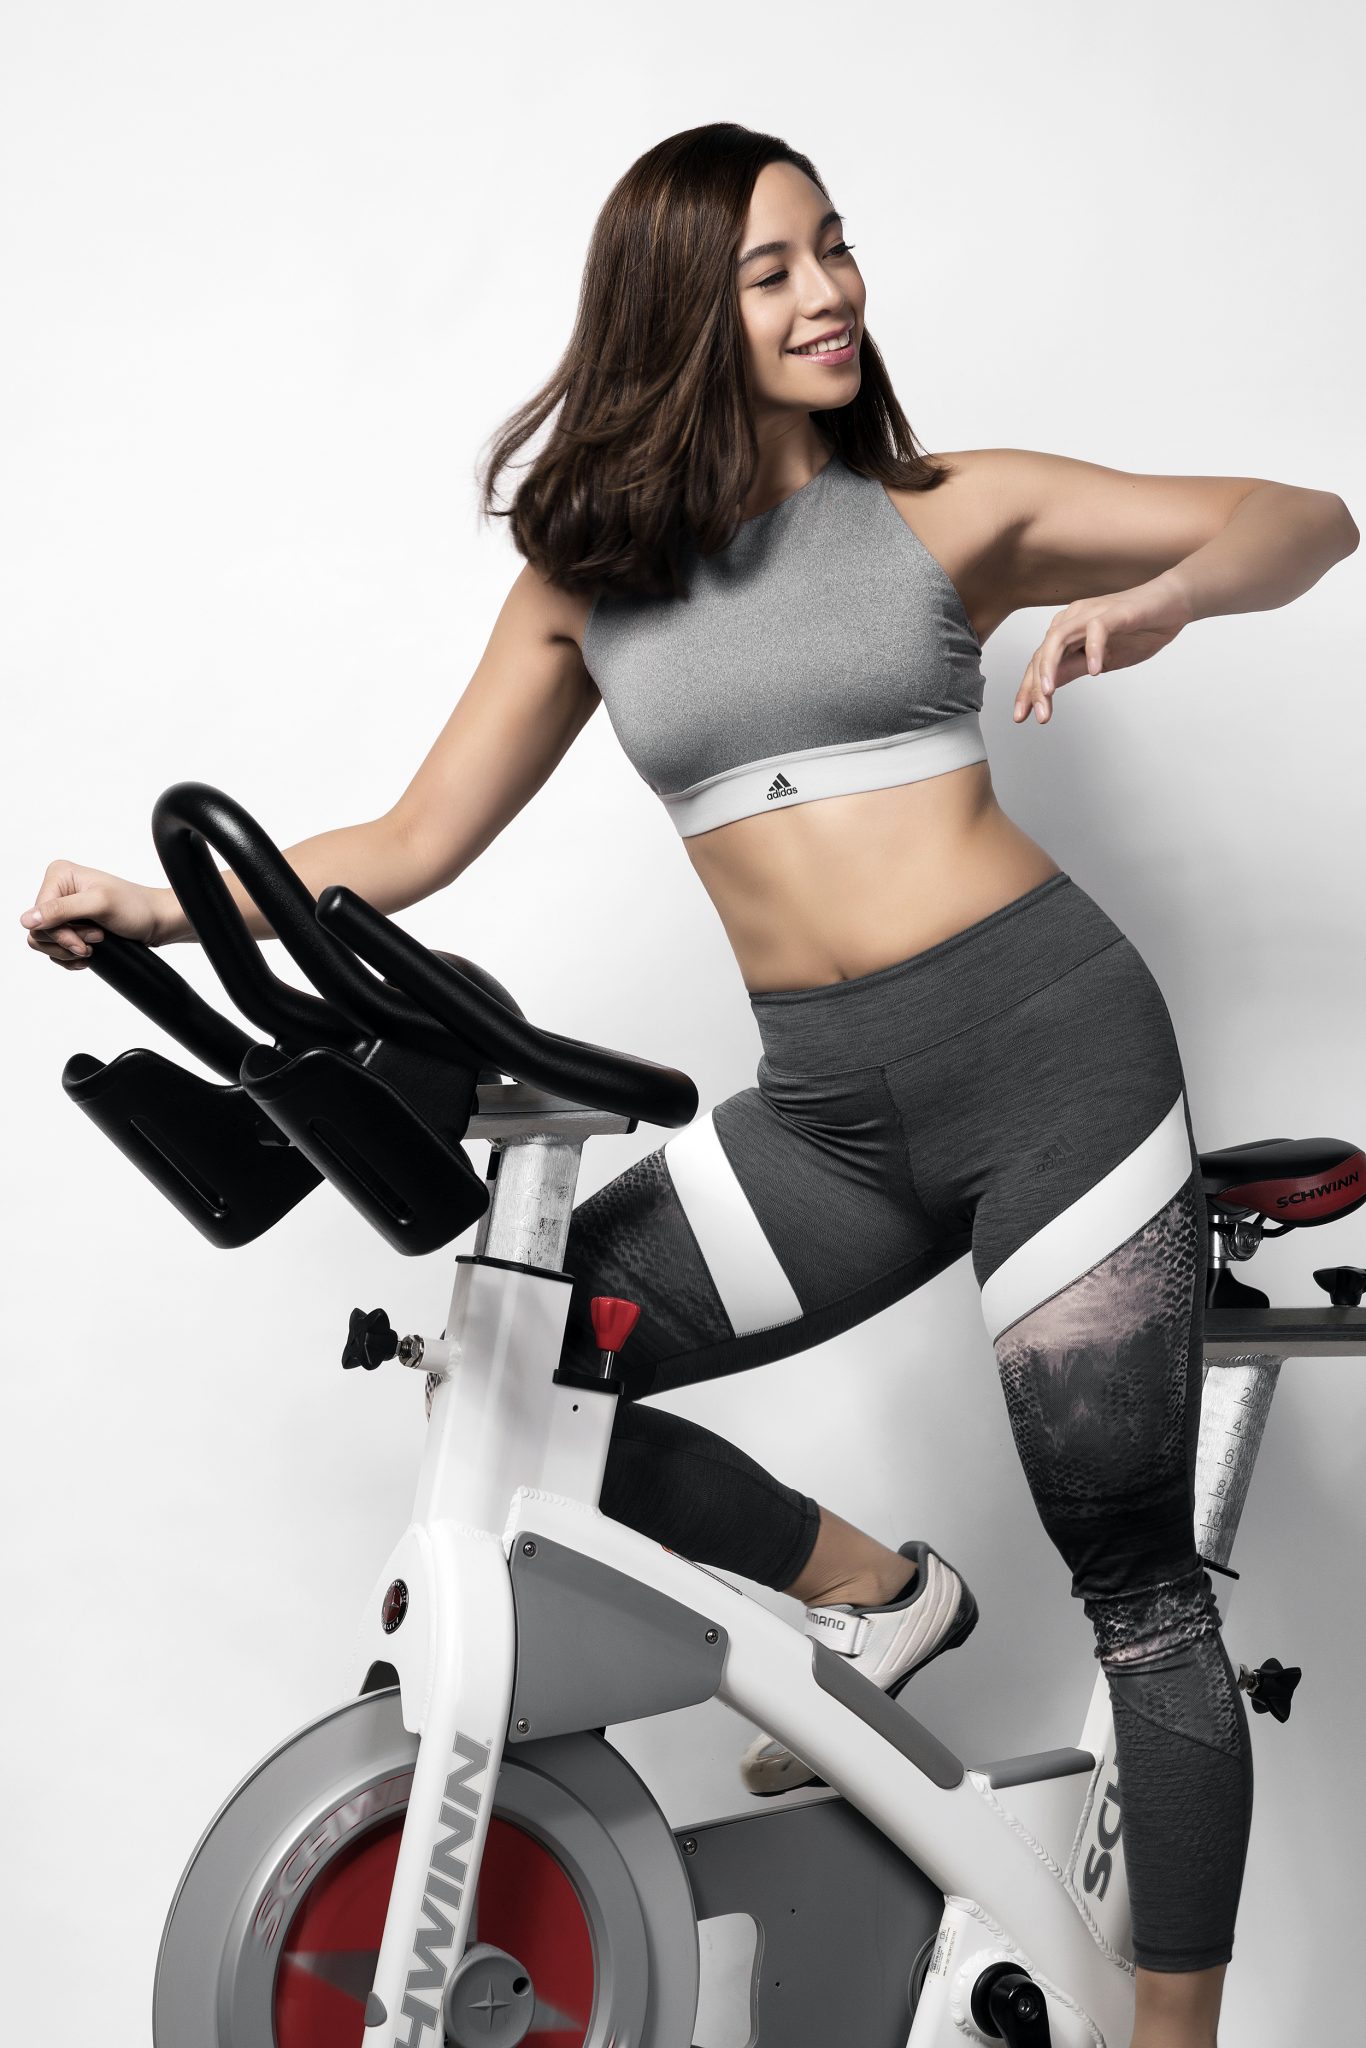 Ida Paras shares that she has seen all types of emotions in a spinning class